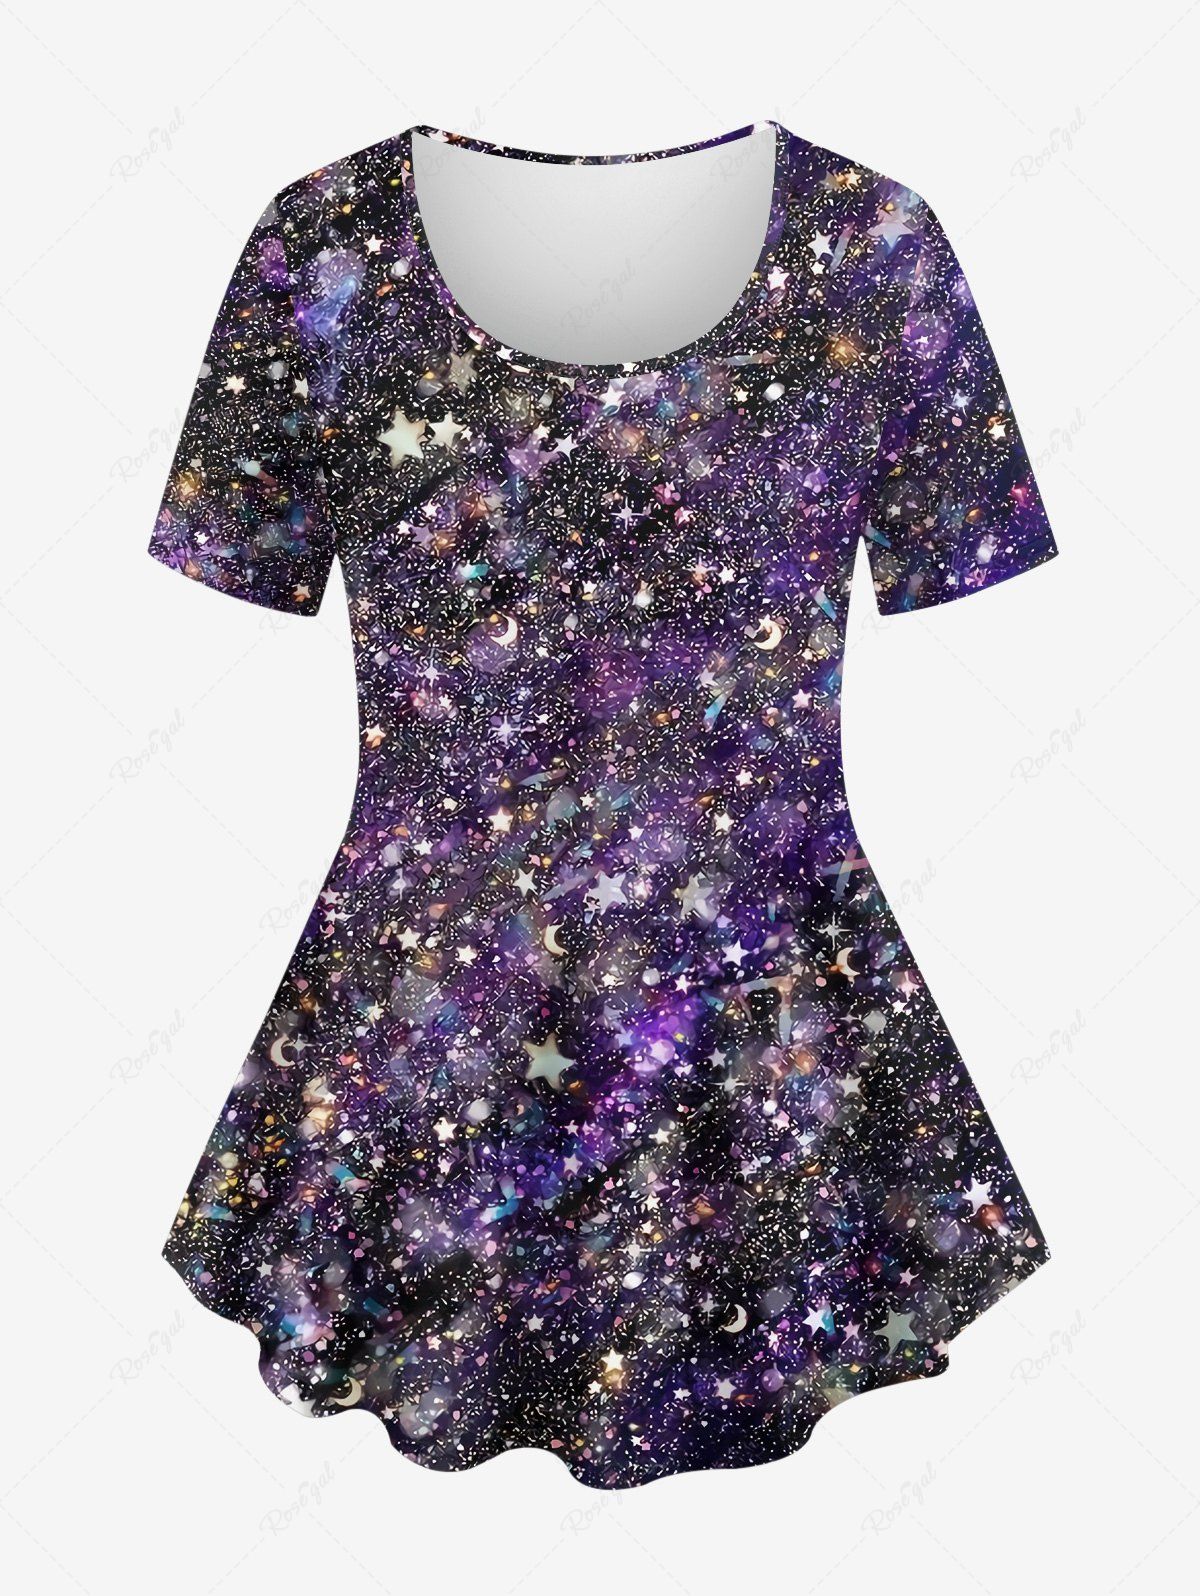 New Plus Size Galaxy Ombre Sparkling Sequin Glitter Star 3D Print T-shirt  